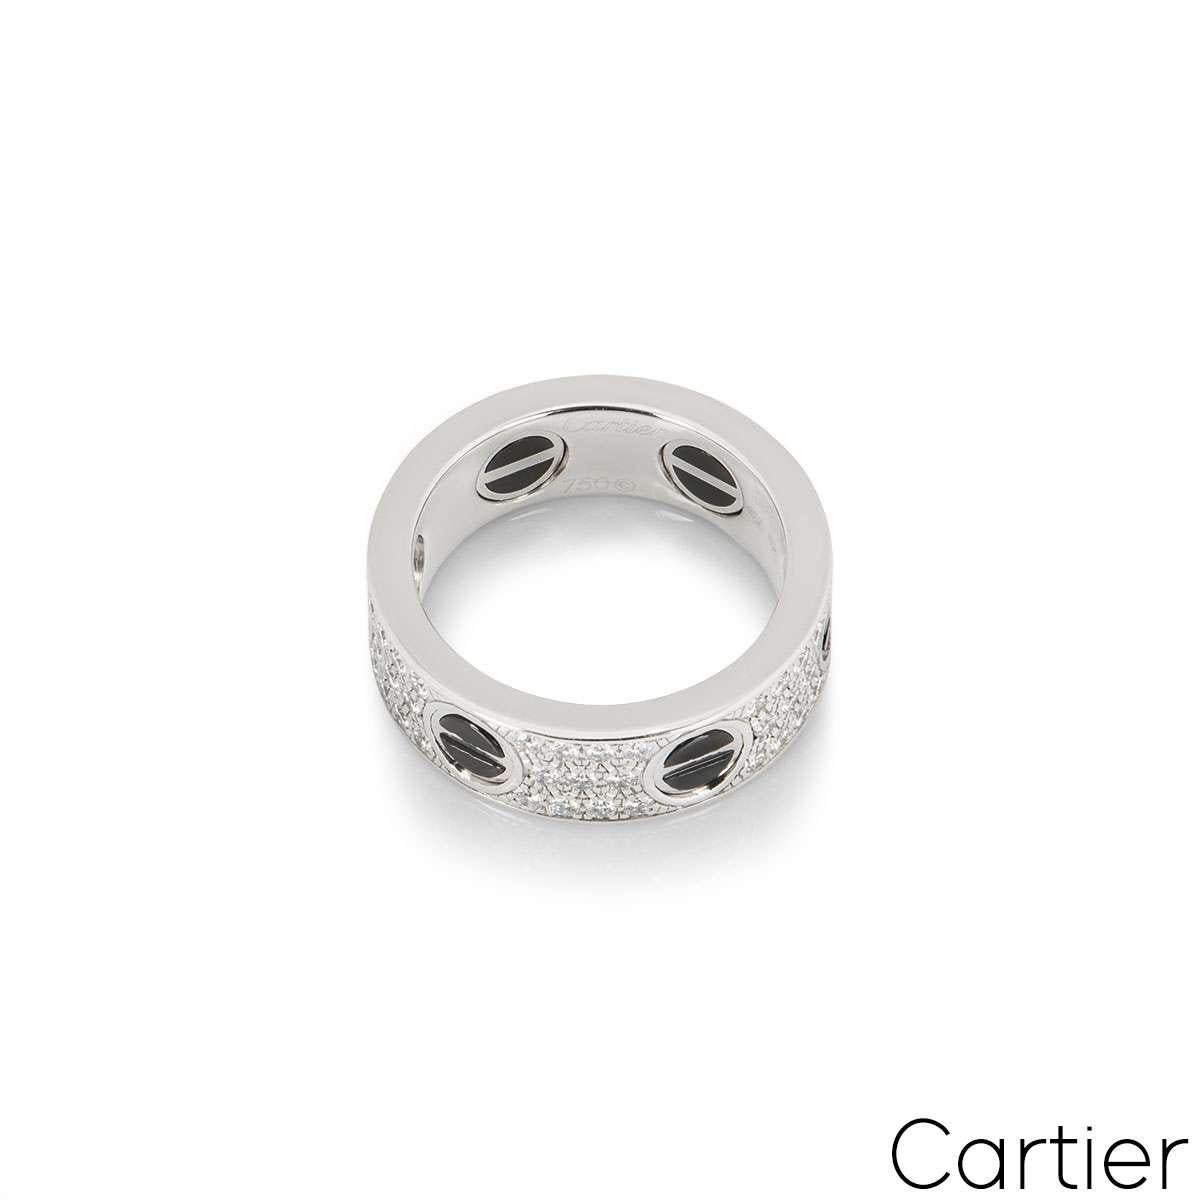 Cartier White Gold Diamond & Ceramic Love Ring B4207600 In Excellent Condition For Sale In London, GB